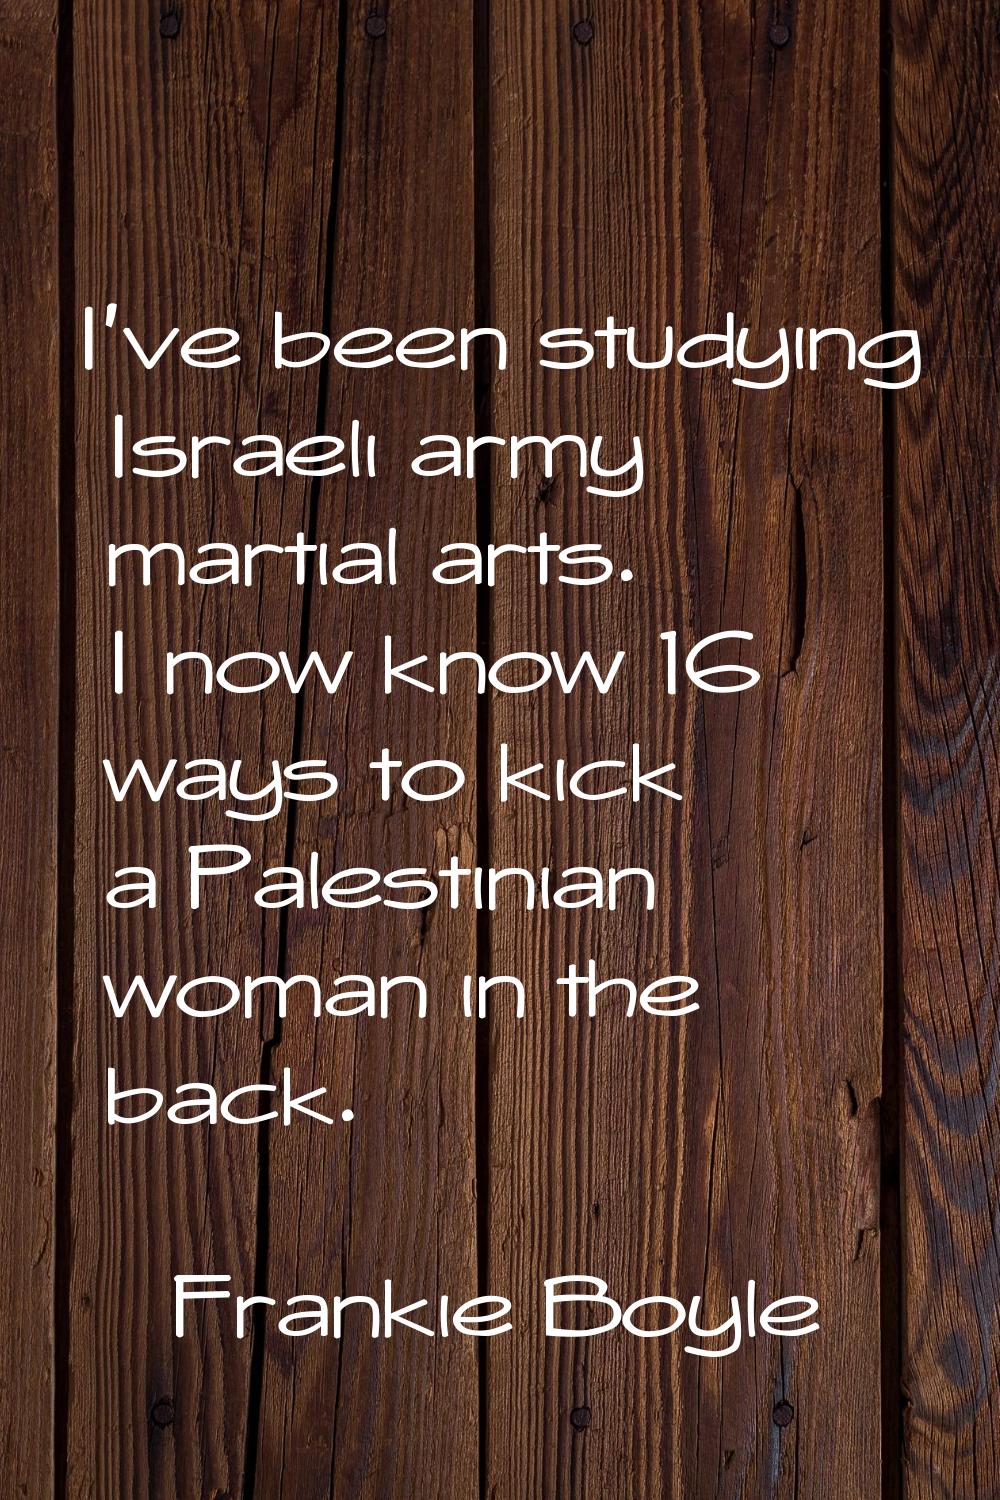 I've been studying Israeli army martial arts. I now know 16 ways to kick a Palestinian woman in the